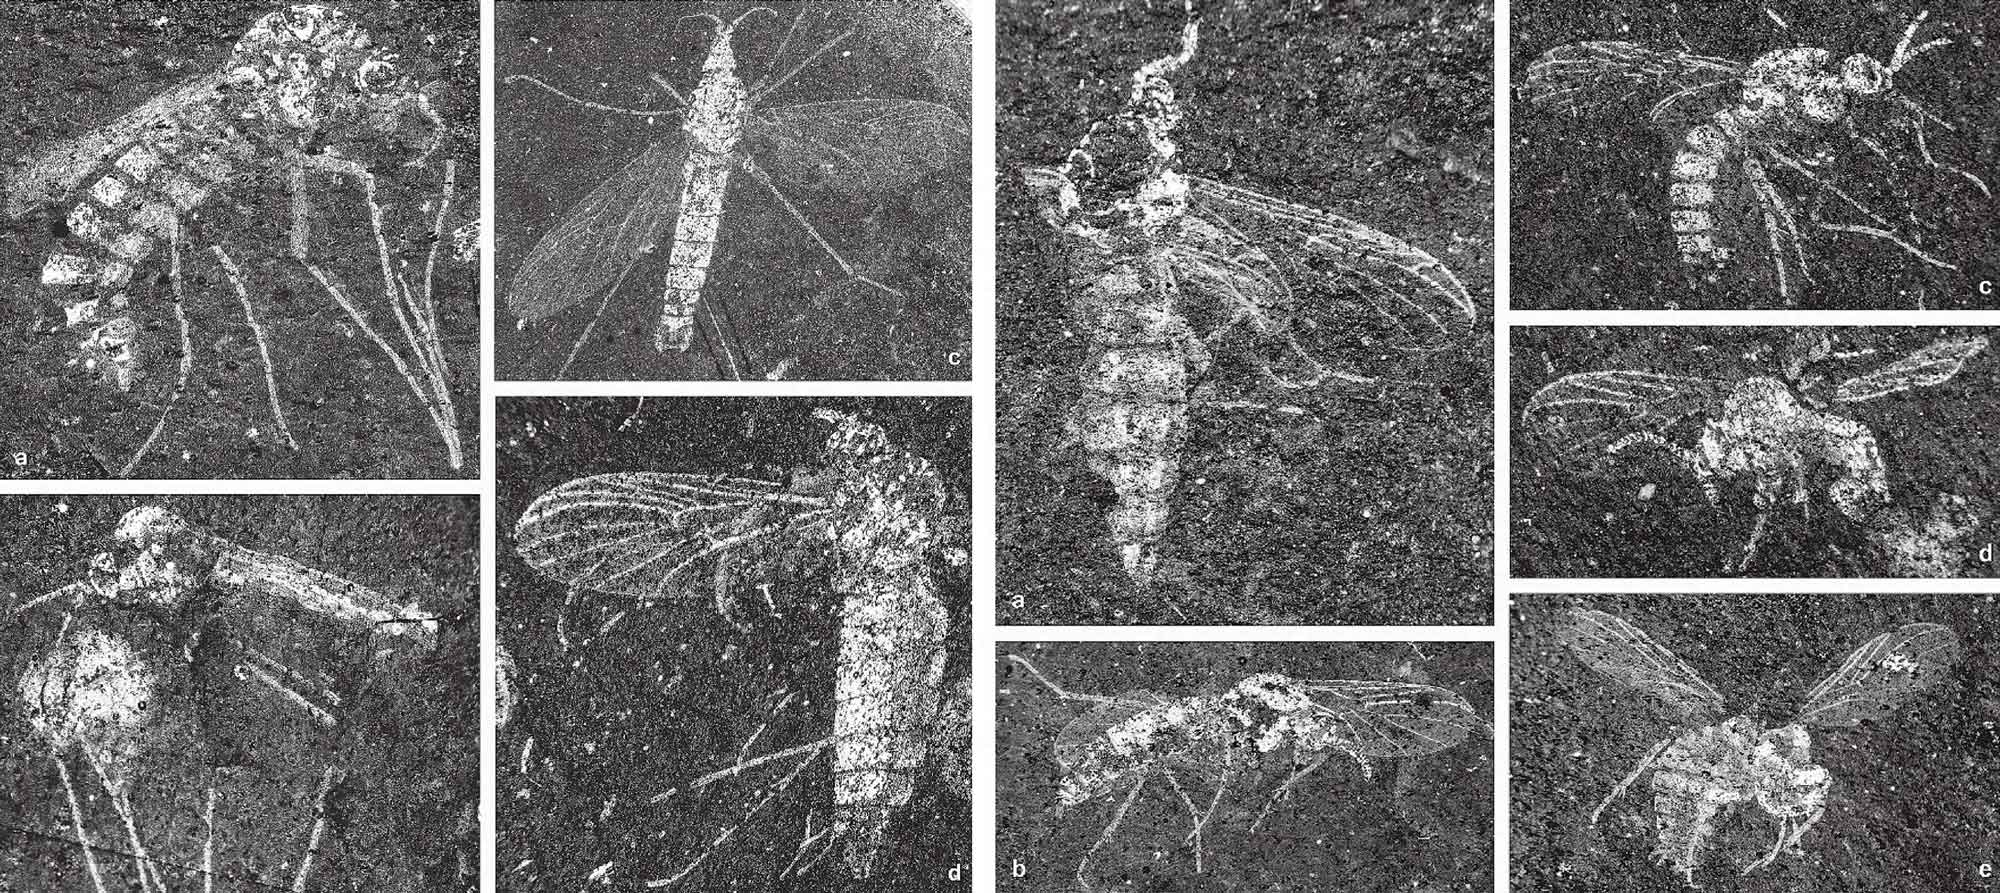 Portions of two figures showing fossil insects from the Triassic Solite Quarry in Virginia.